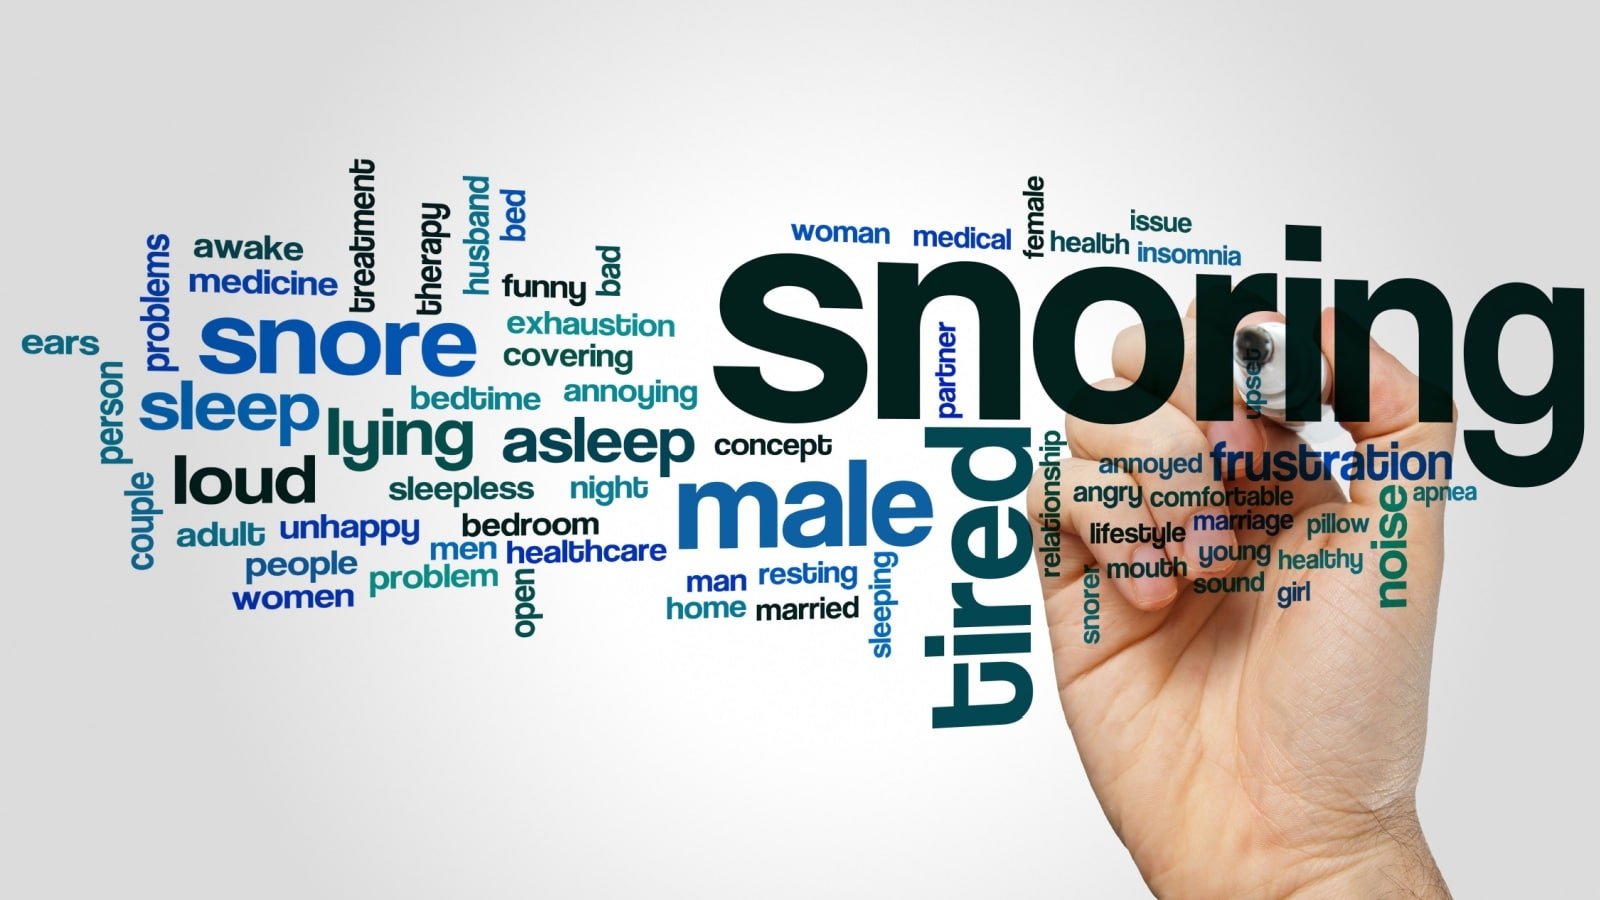 <p>While often benign, snoring can signal severe health conditions, including obstructive sleep apnea, which Johns Hopkins sleep specialist Alan Schwartz, M.D., emphasizes as a major cardiovascular risk. </p> <p><strong><a href="https://www.mayoclinic.org/diseases-conditions/sleep-apnea/symptoms-causes/syc-20377631" rel="noopener">Sleep apnea</a></strong> involves repeated breathing interruptions during sleep, occurring as frequently as 20 to 30 times per hour. These interruptions reduce oxygen levels in the blood and disrupt deep sleep, leading to increased cardiovascular strain and elevated adrenaline levels.</p>